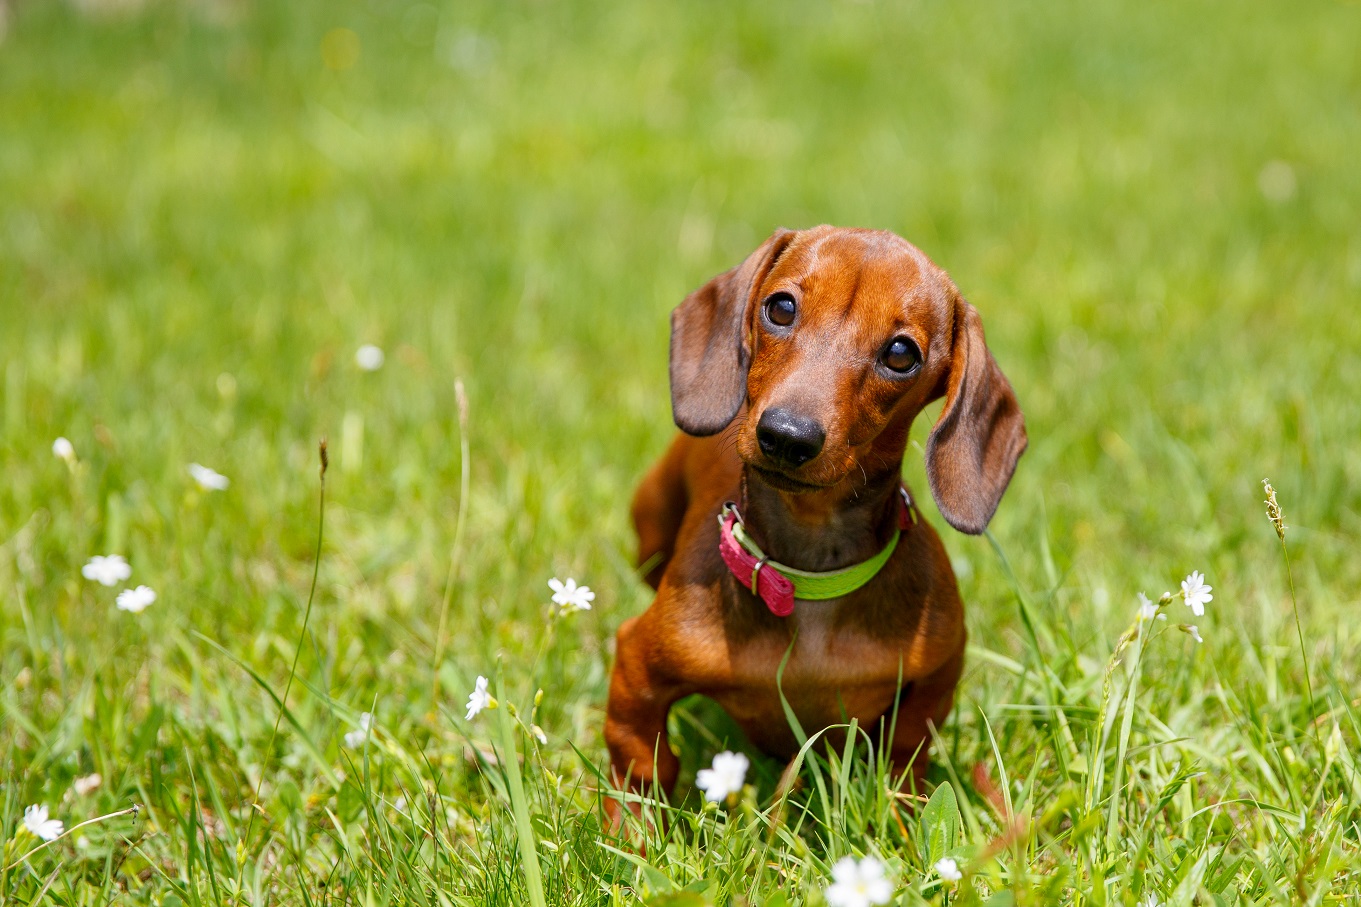 How To Potty Train A Dachshund The Quick & Easy Way